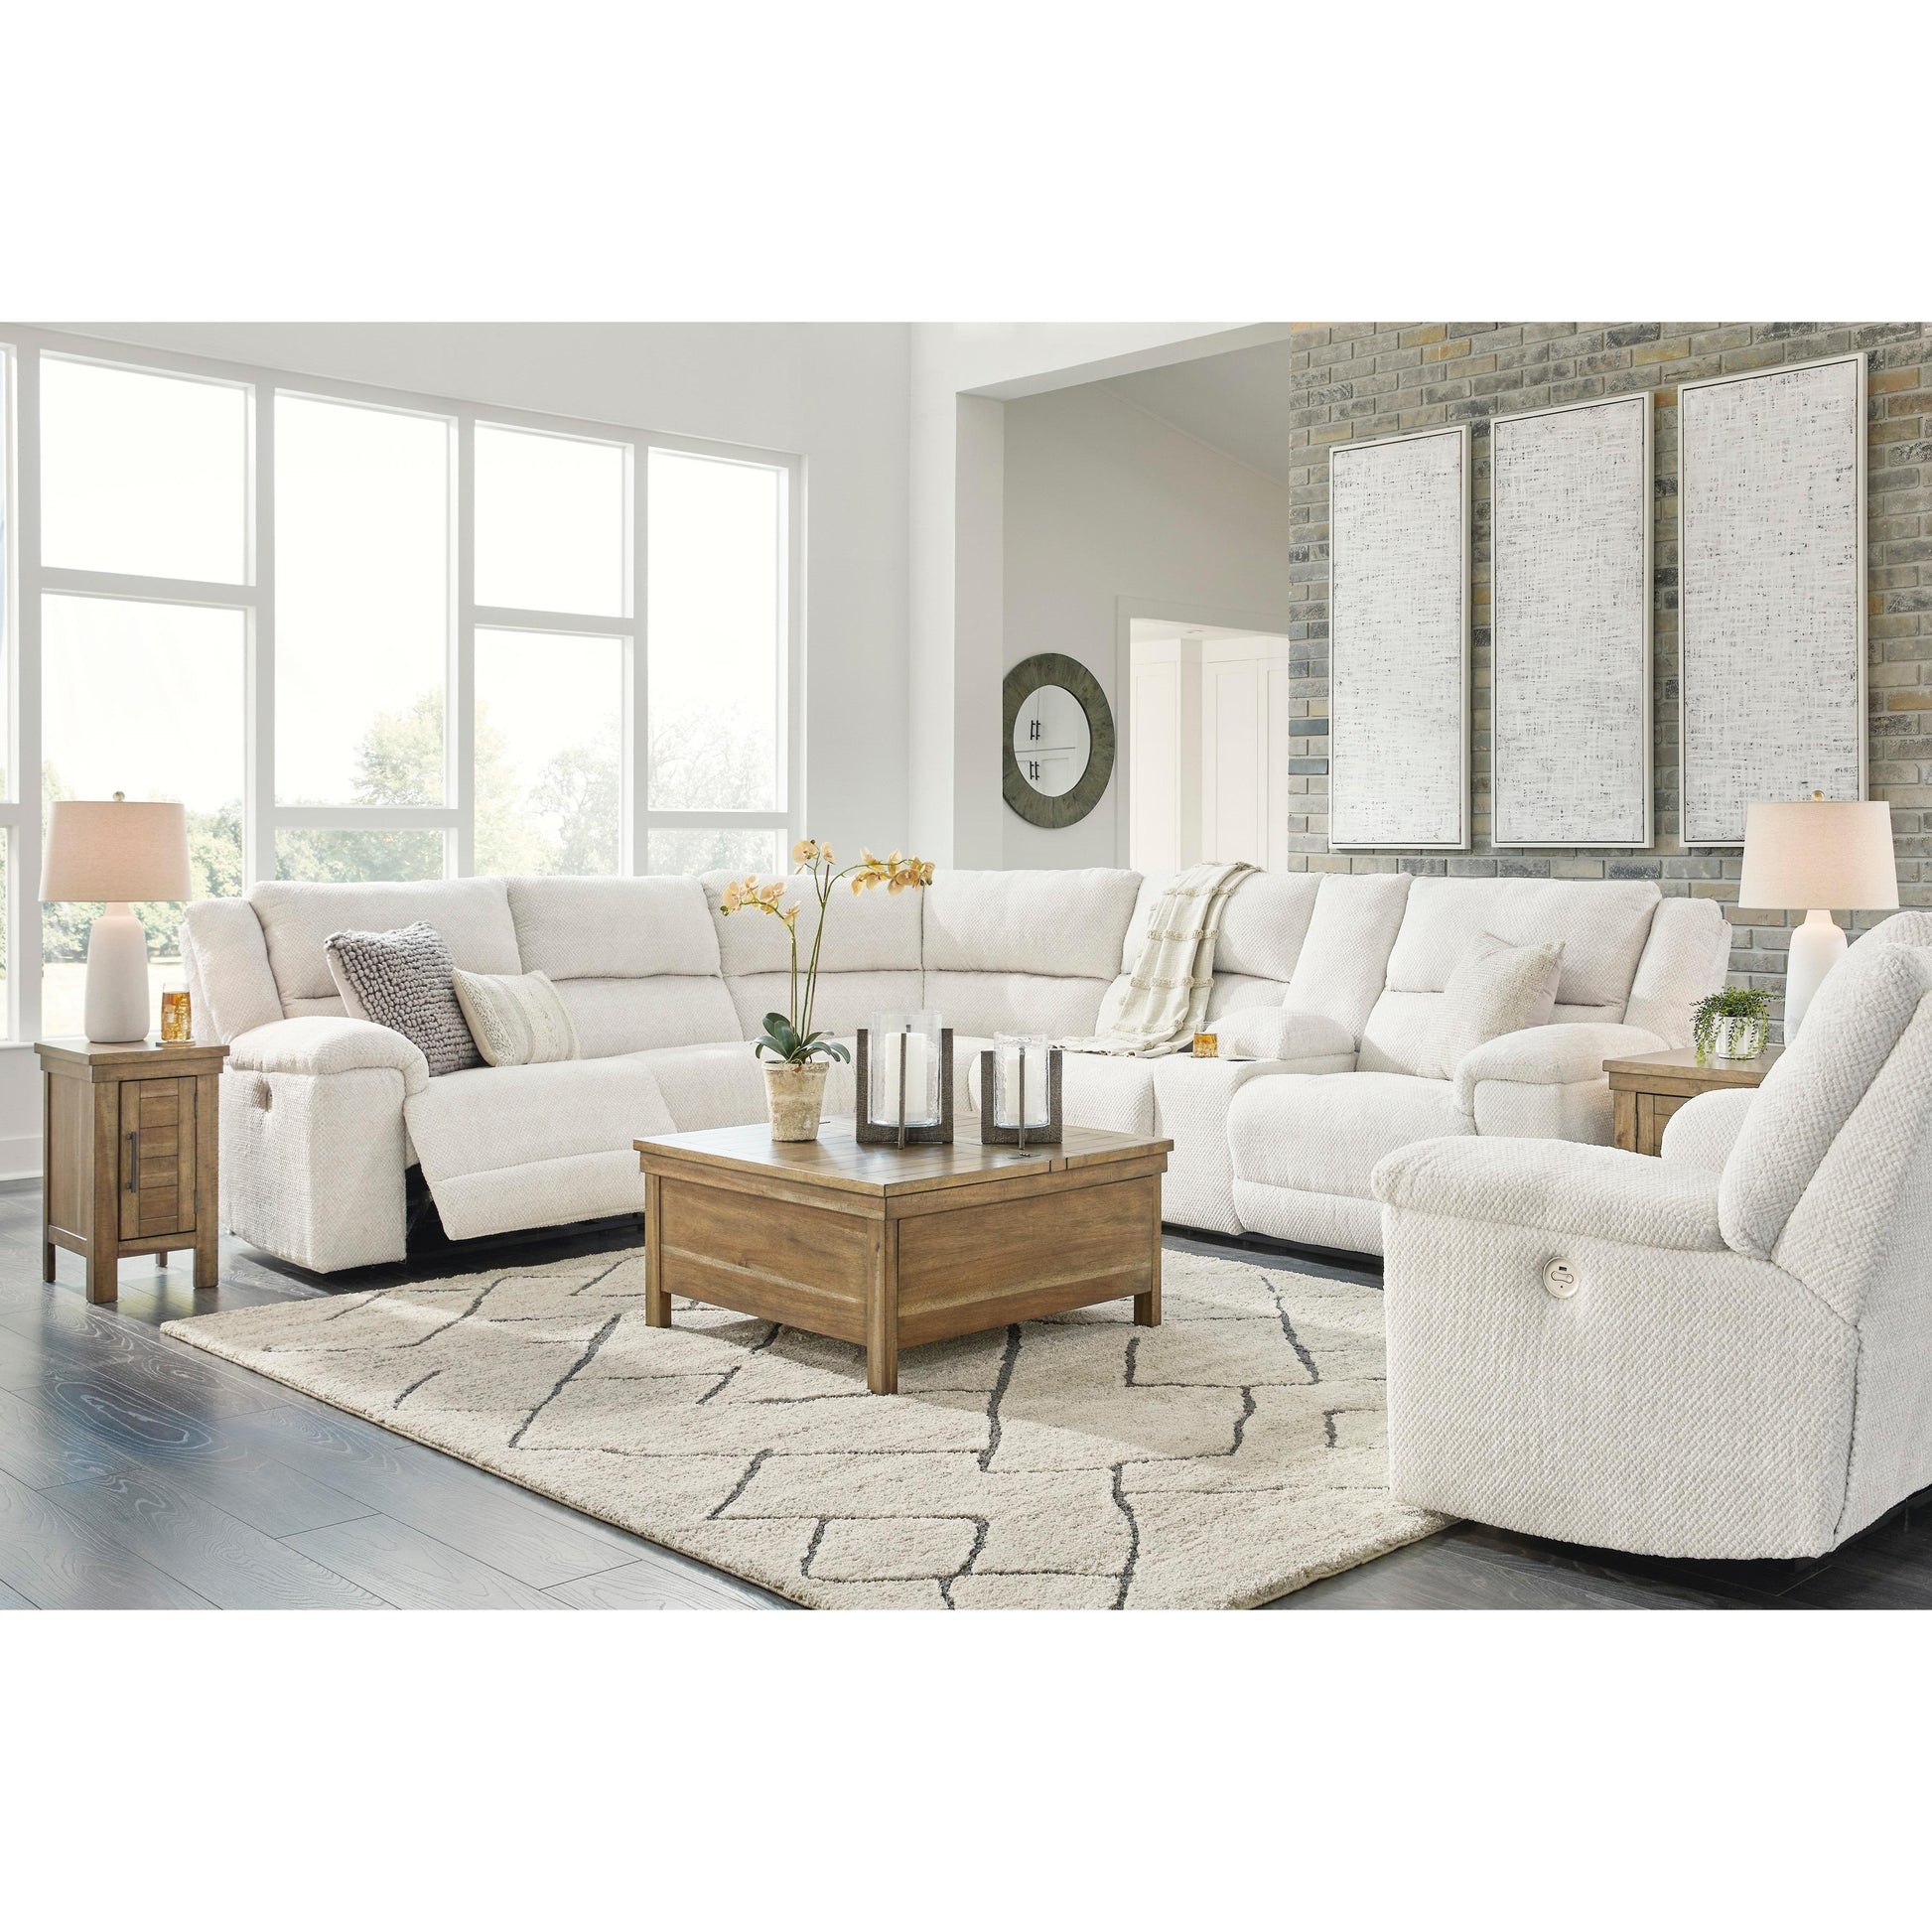 Signature Design by Ashley Keensburg Power Reclining Fabric 3 pc Sectional 6180763/6180777/6180790 IMAGE 5